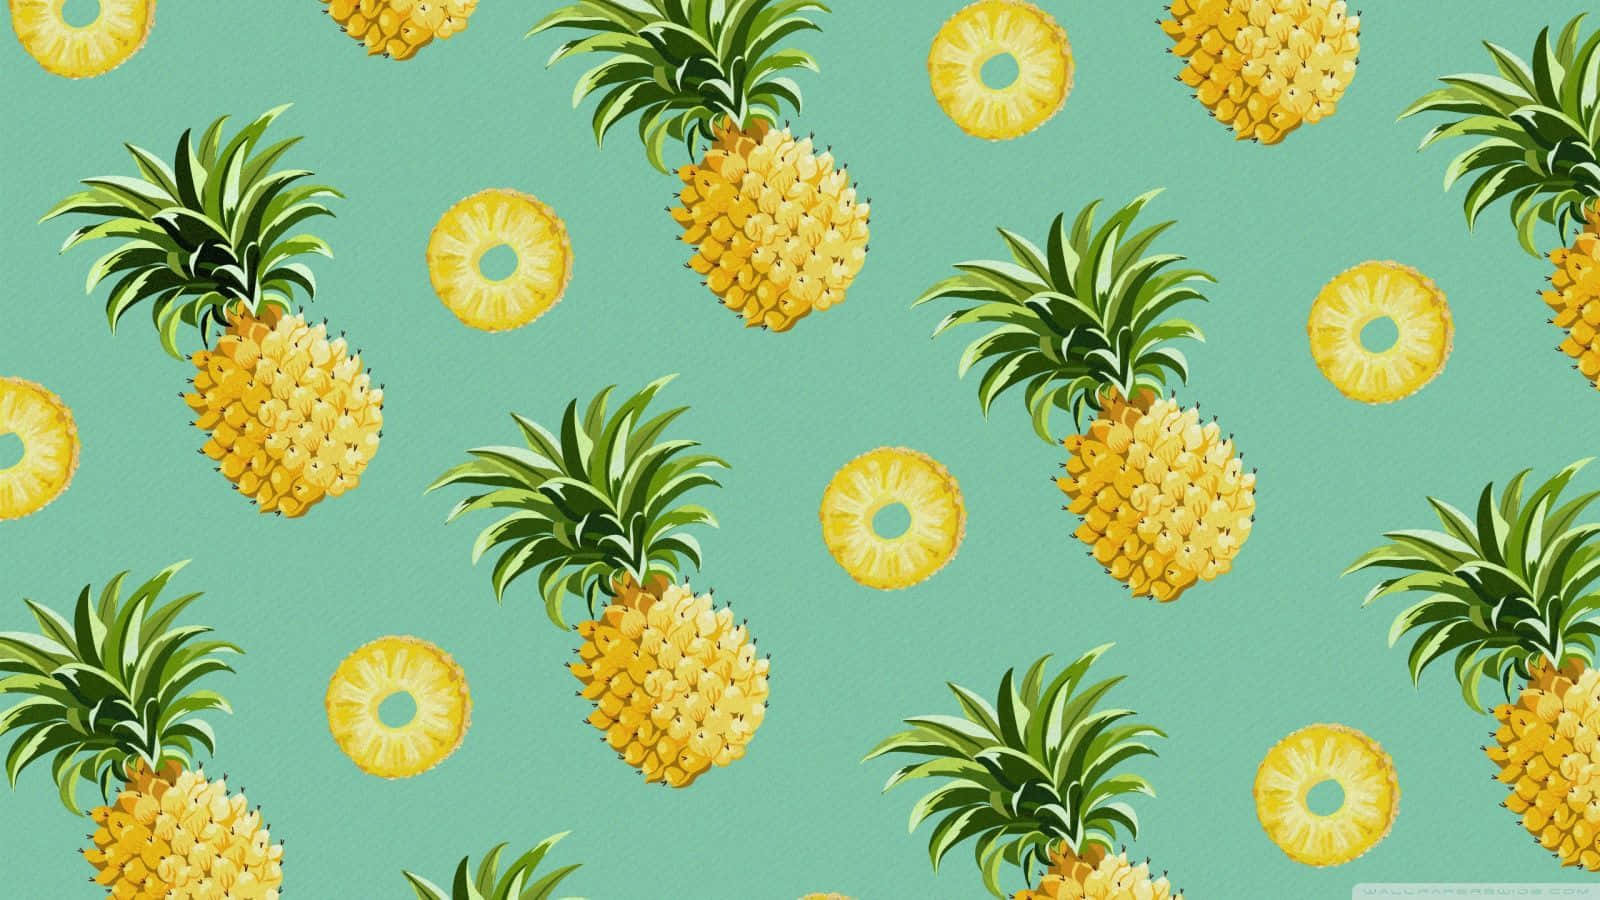 Cute Pineapple Mobile Phone Background Wallpaper Wallpaper Image For Free  Download  Pngtree